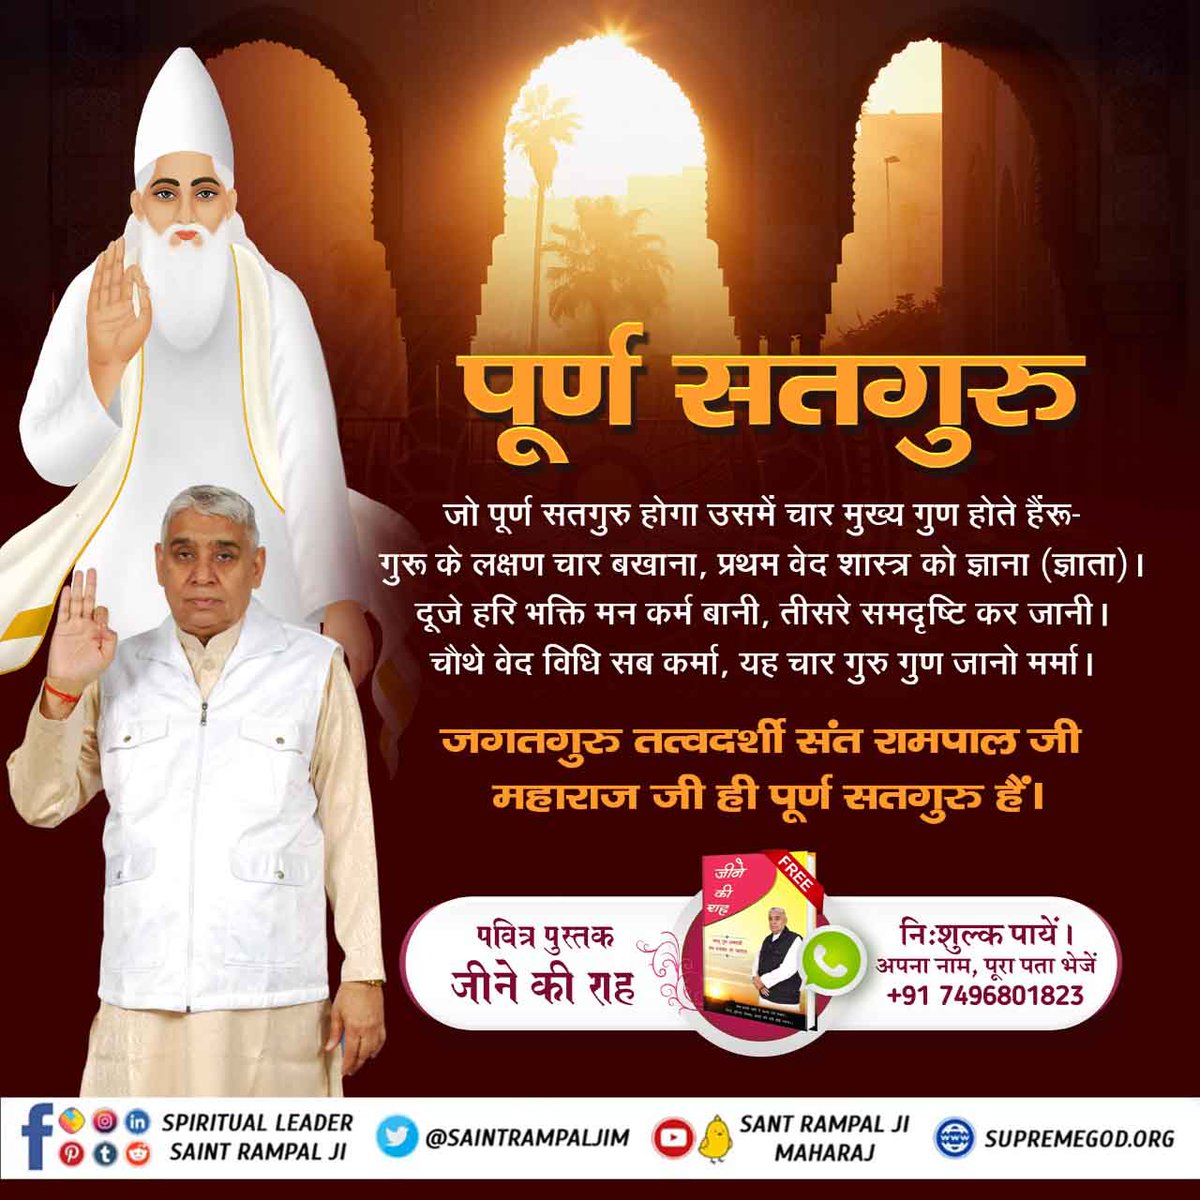 #GodMorningFriday
Today in Kaliyuga, the most complex question in front of the Bhakt Samaj is to identify the Complete Guru. But its very short and simple answer is that the guru who does devotion according to the scriptures.
@SatlokChannel
@SaintRampalJiM